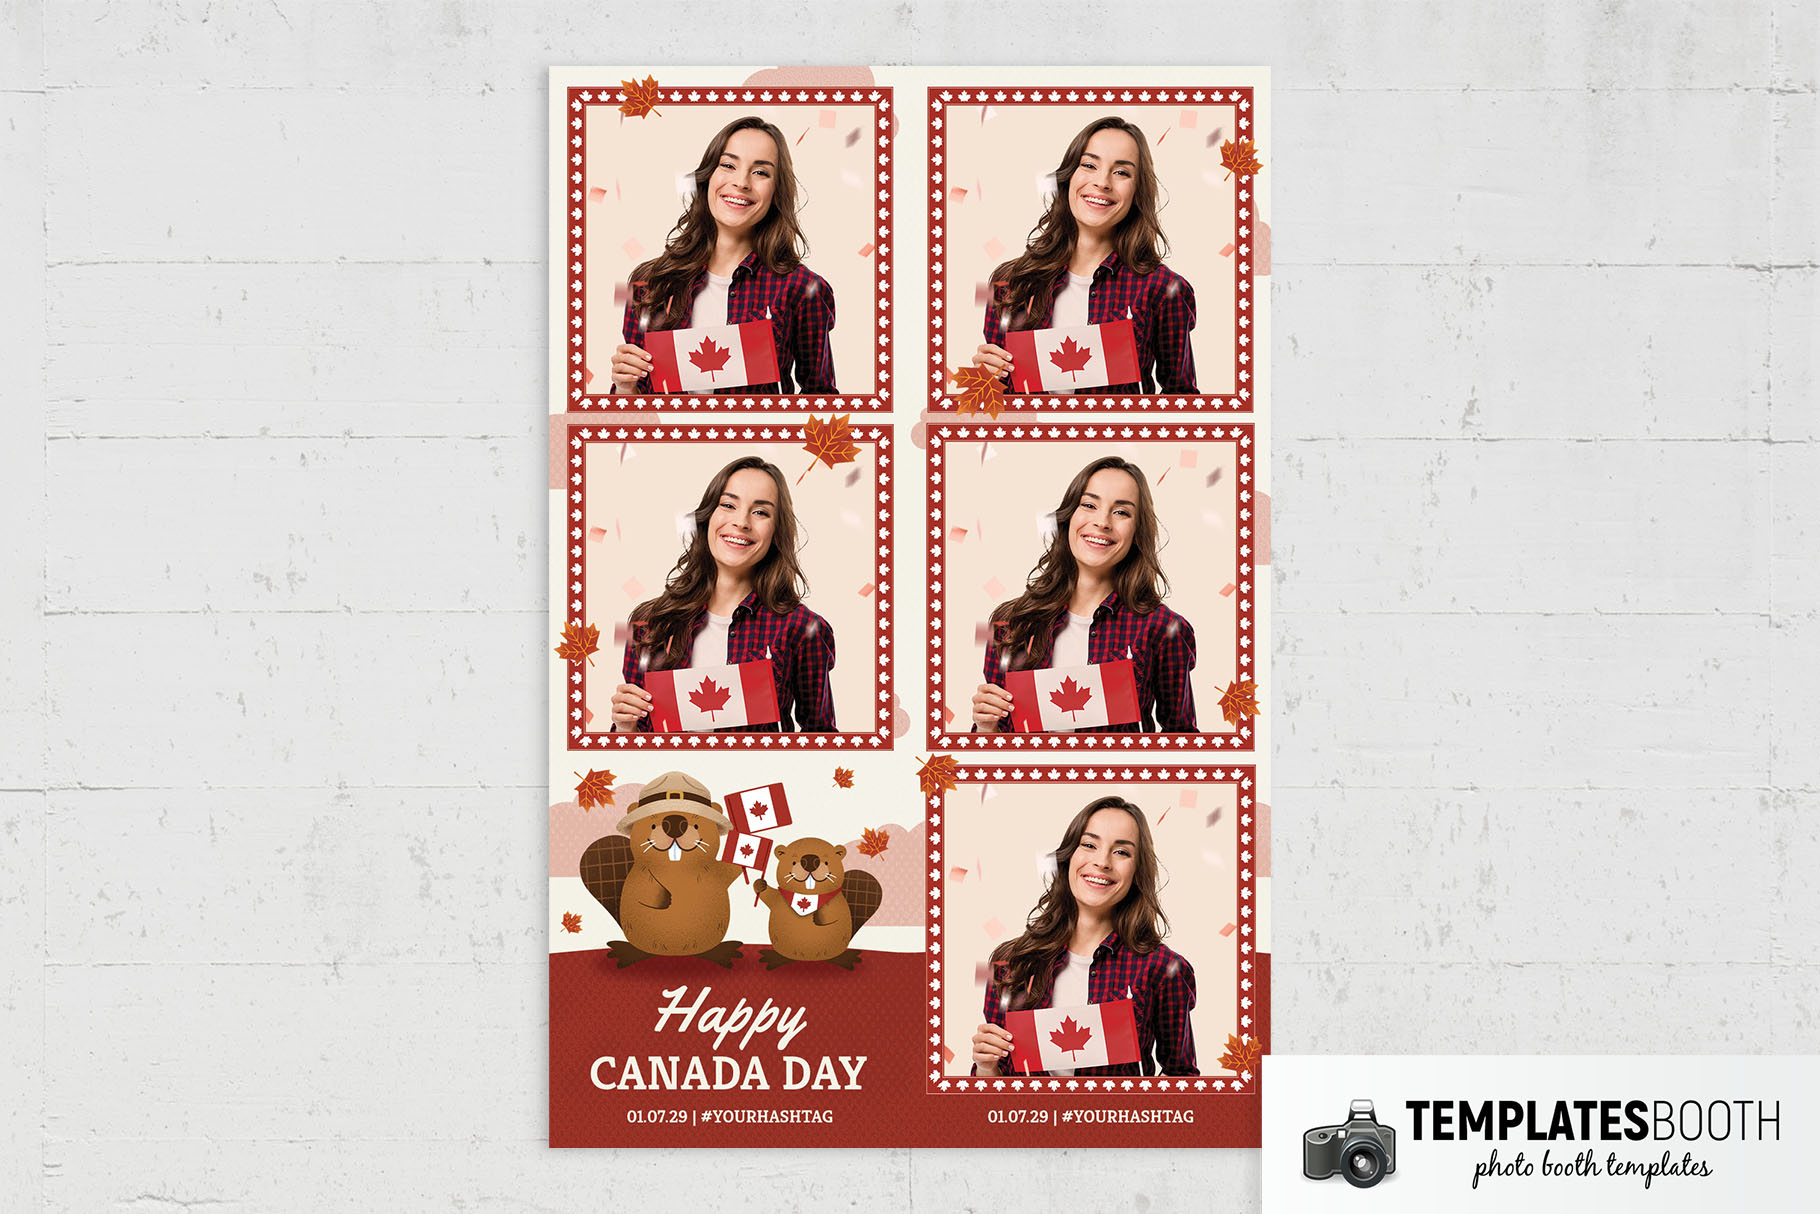 Canada Day Photo Booth Template v2